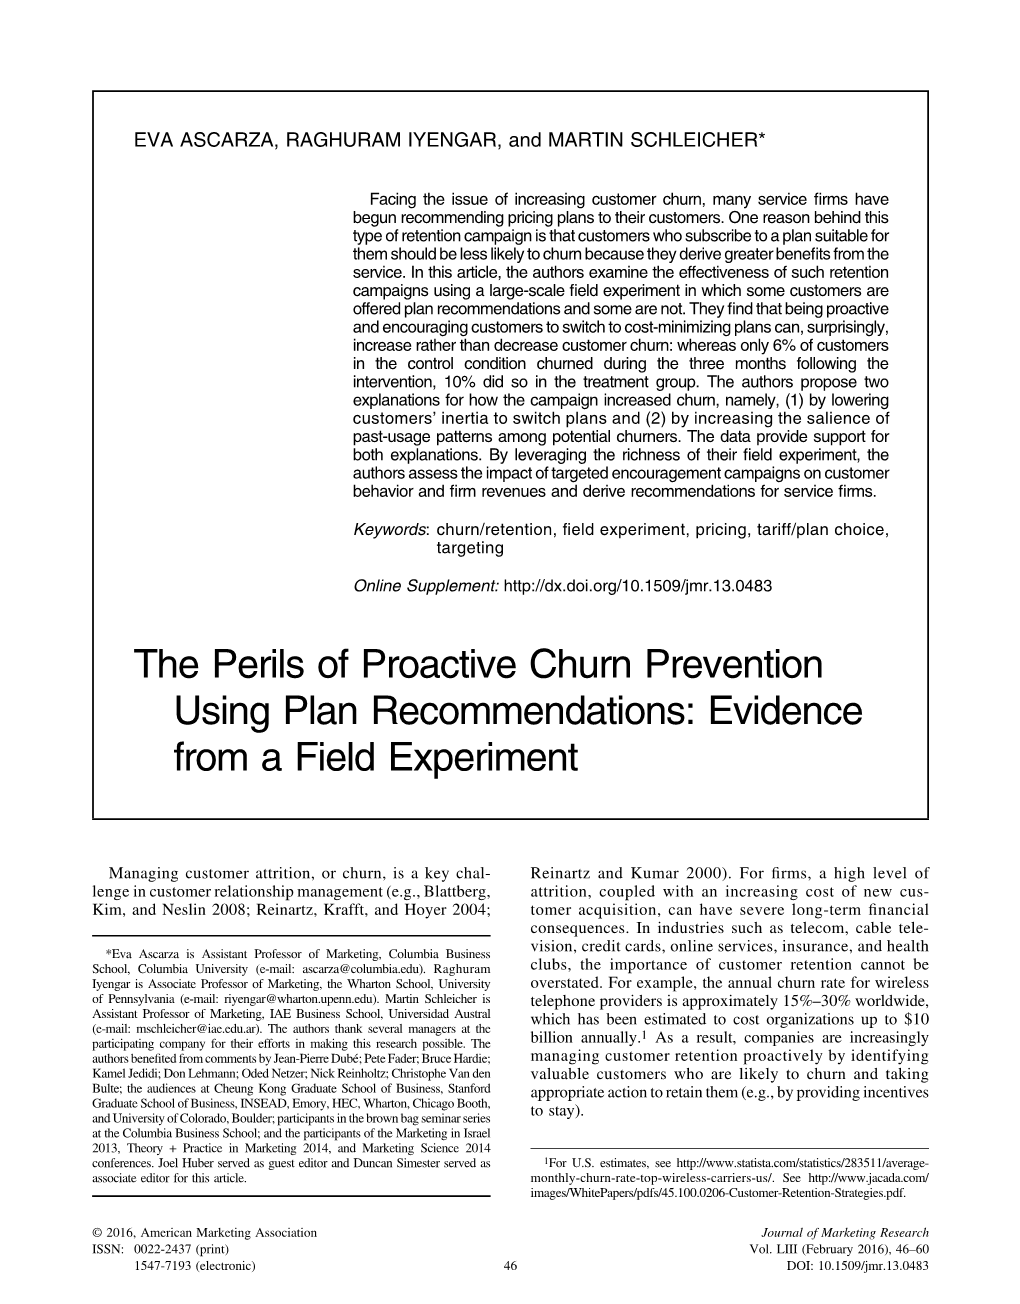 The Perils of Proactive Churn Prevention Using Plan Recommendations: Evidence from a Field Experiment